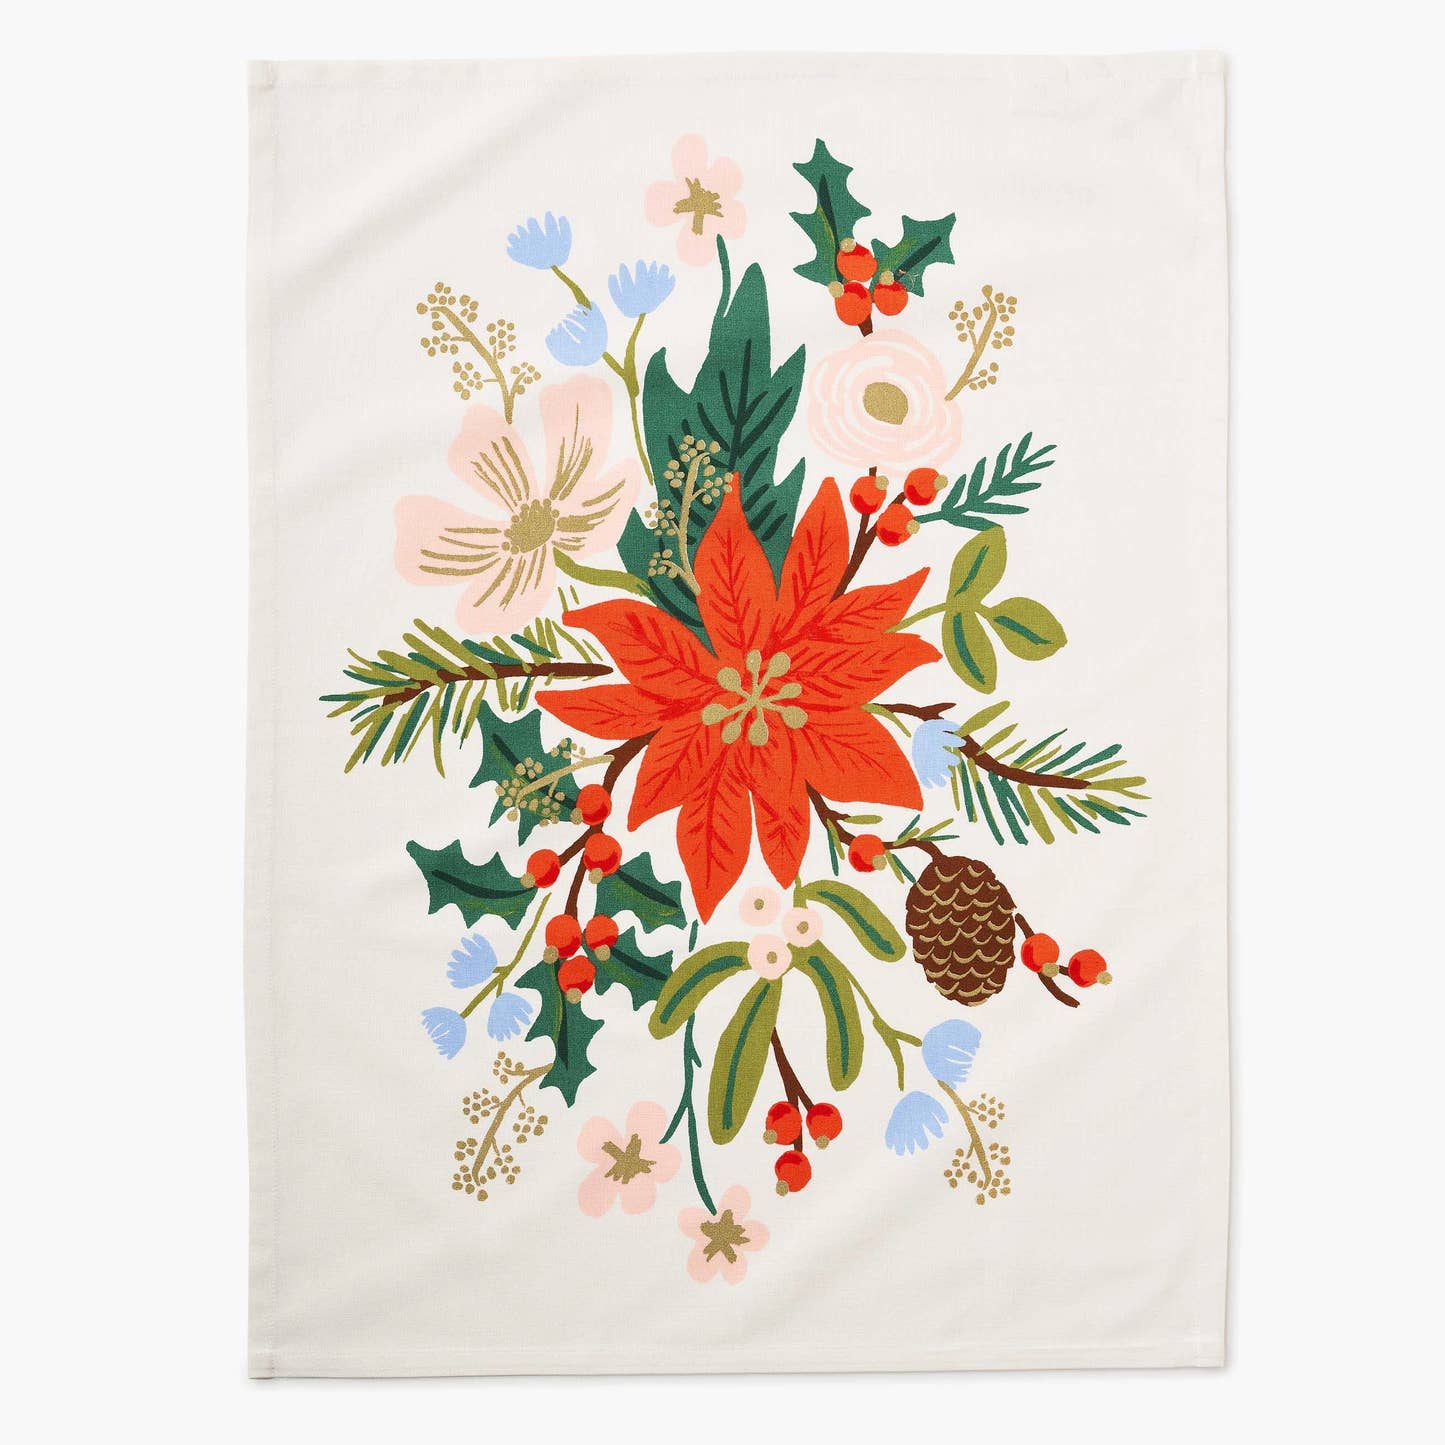 Flat lay of Rifle Paper Co Holiday Bouquet Tea Towel printed in red, green, pink, and blue